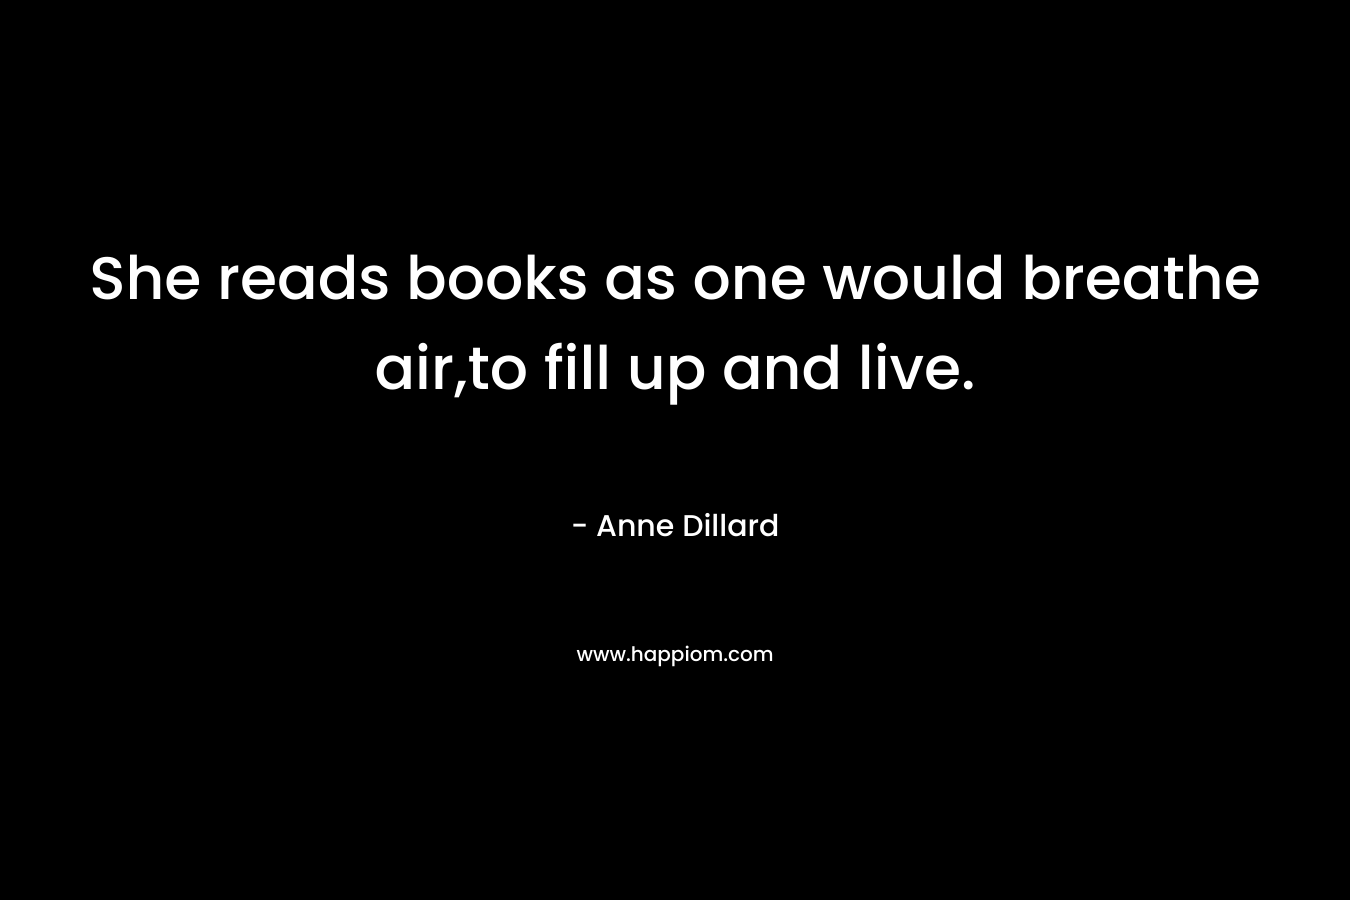 She reads books as one would breathe air,to fill up and live.